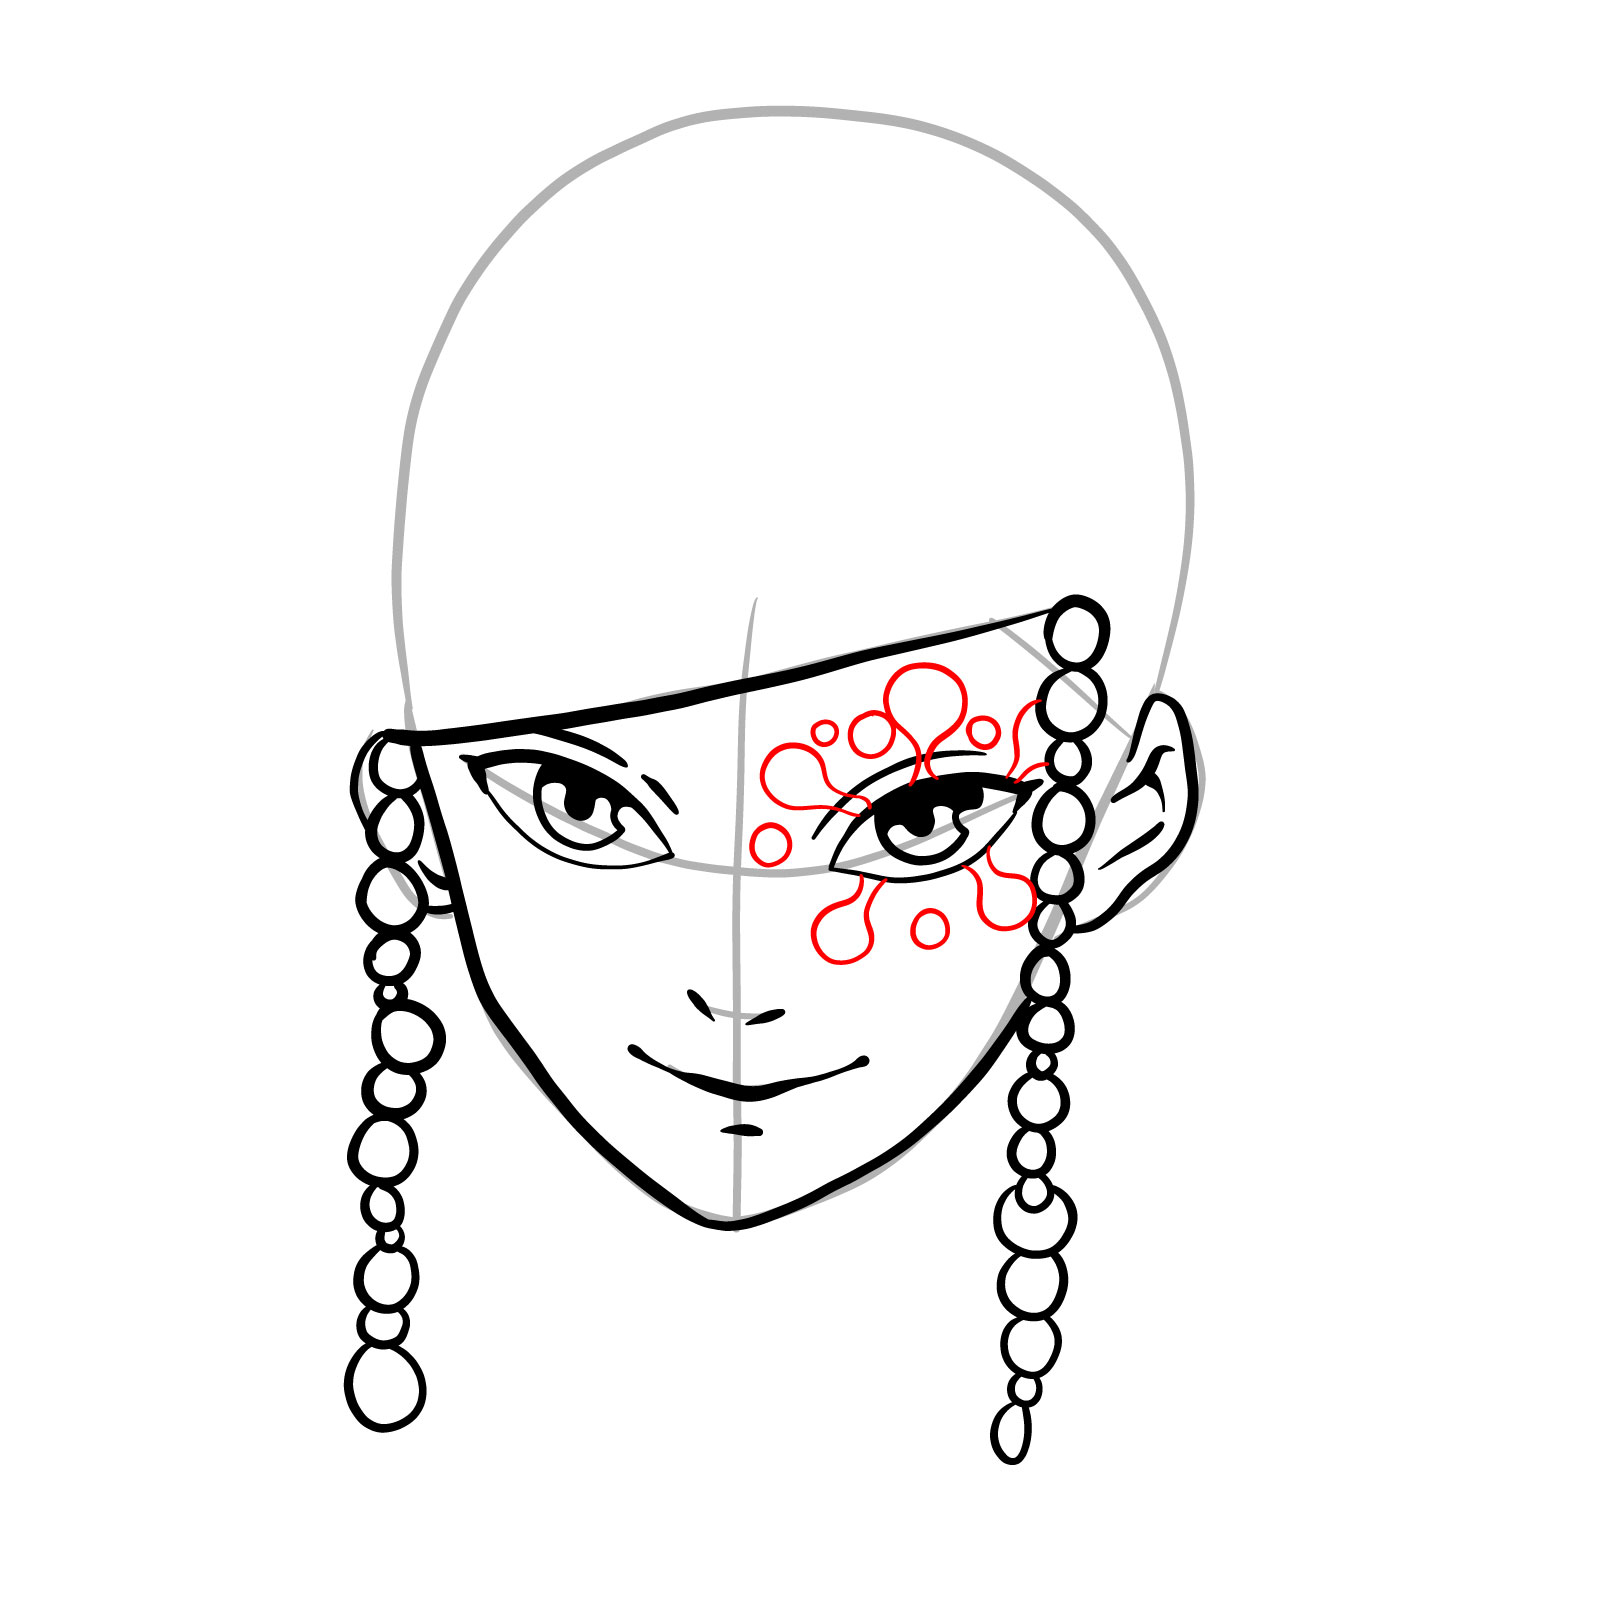 How to draw Lord Tengen's face - step 13